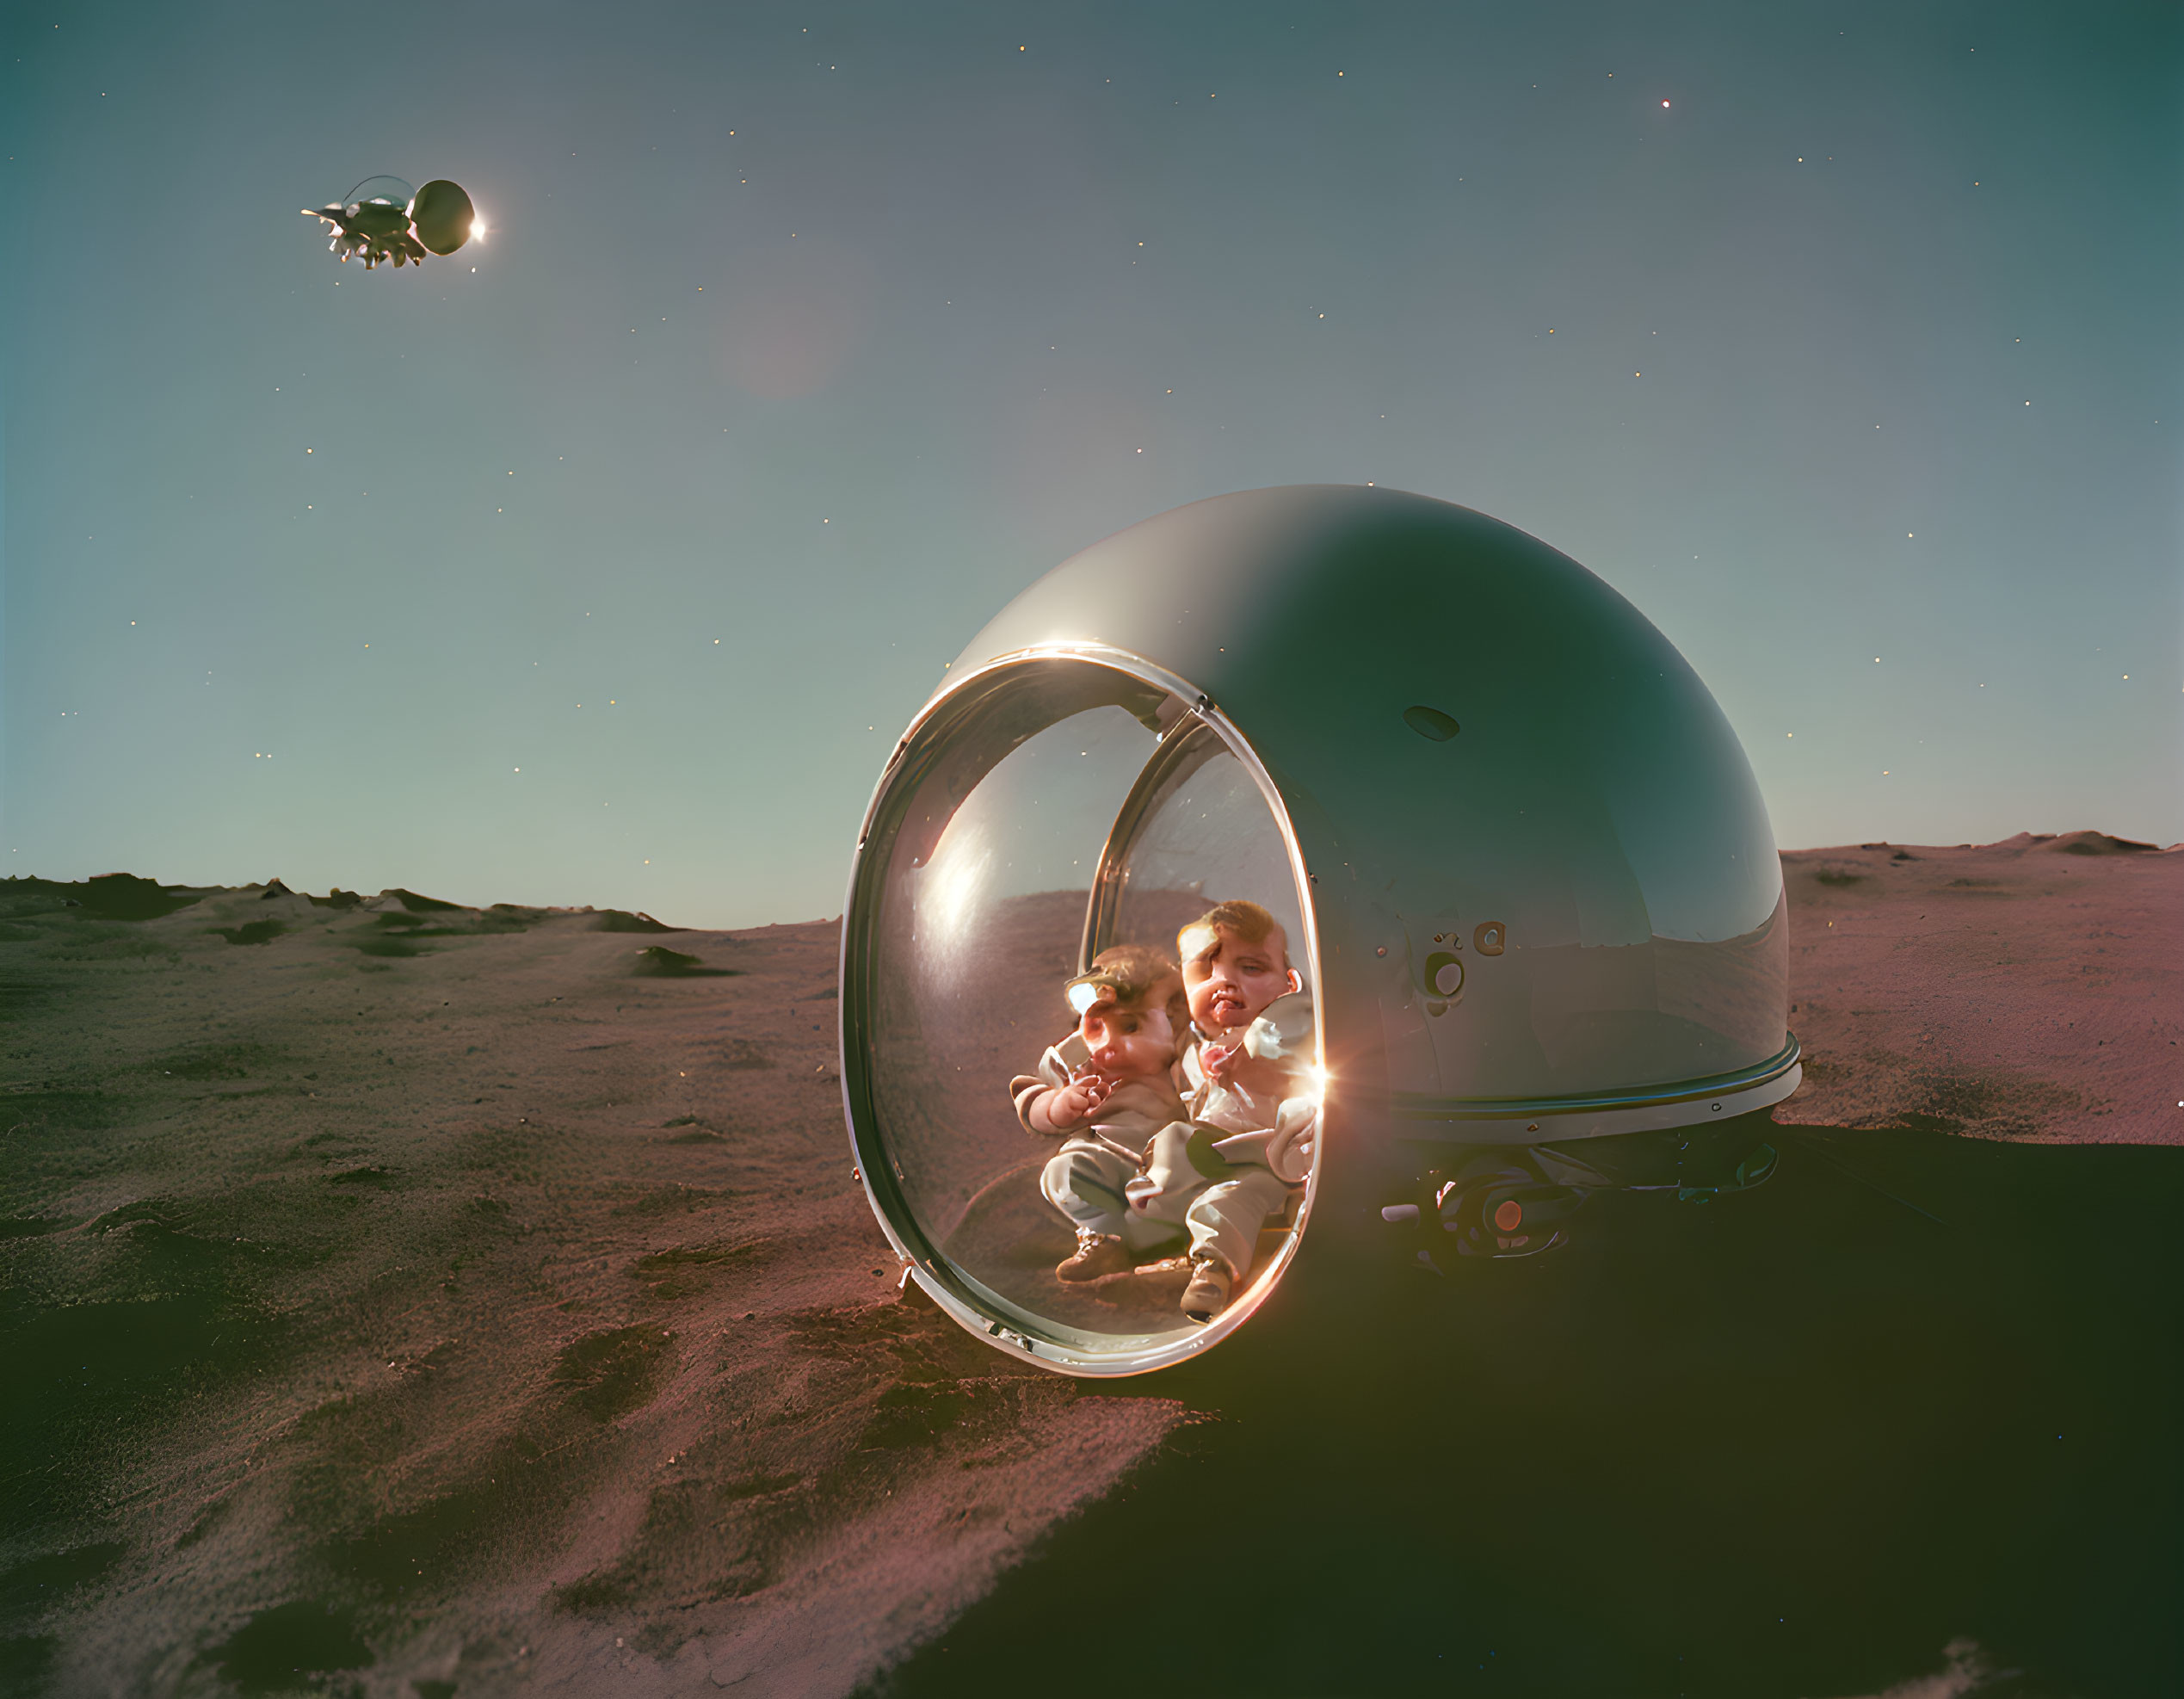 Astronauts in spherical lunar habitat with transparent wall on barren moonscape